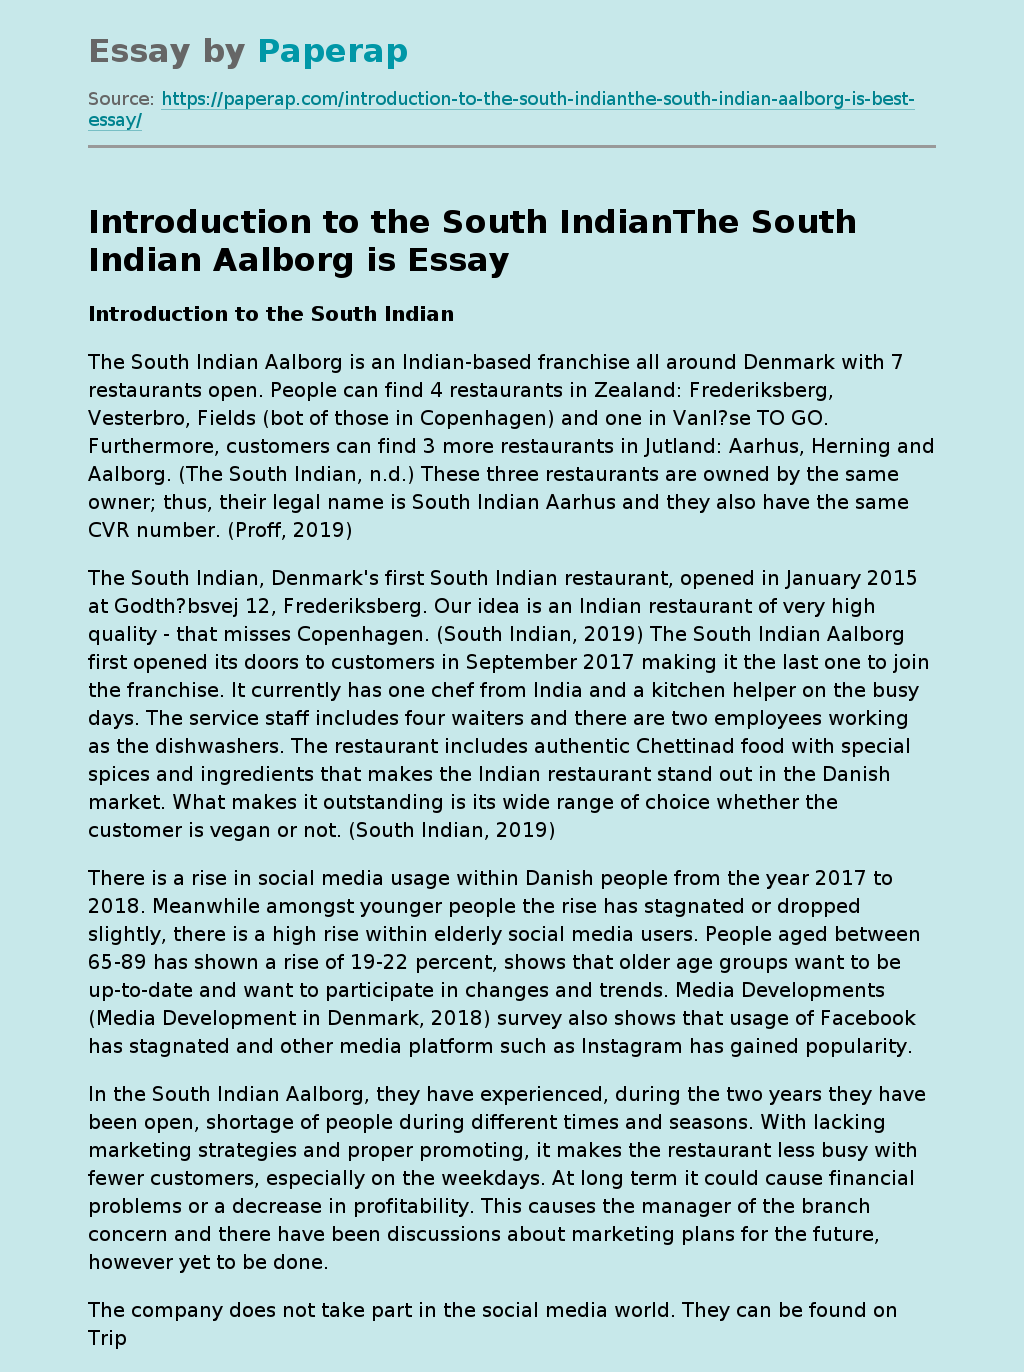 Introduction to the South Indian